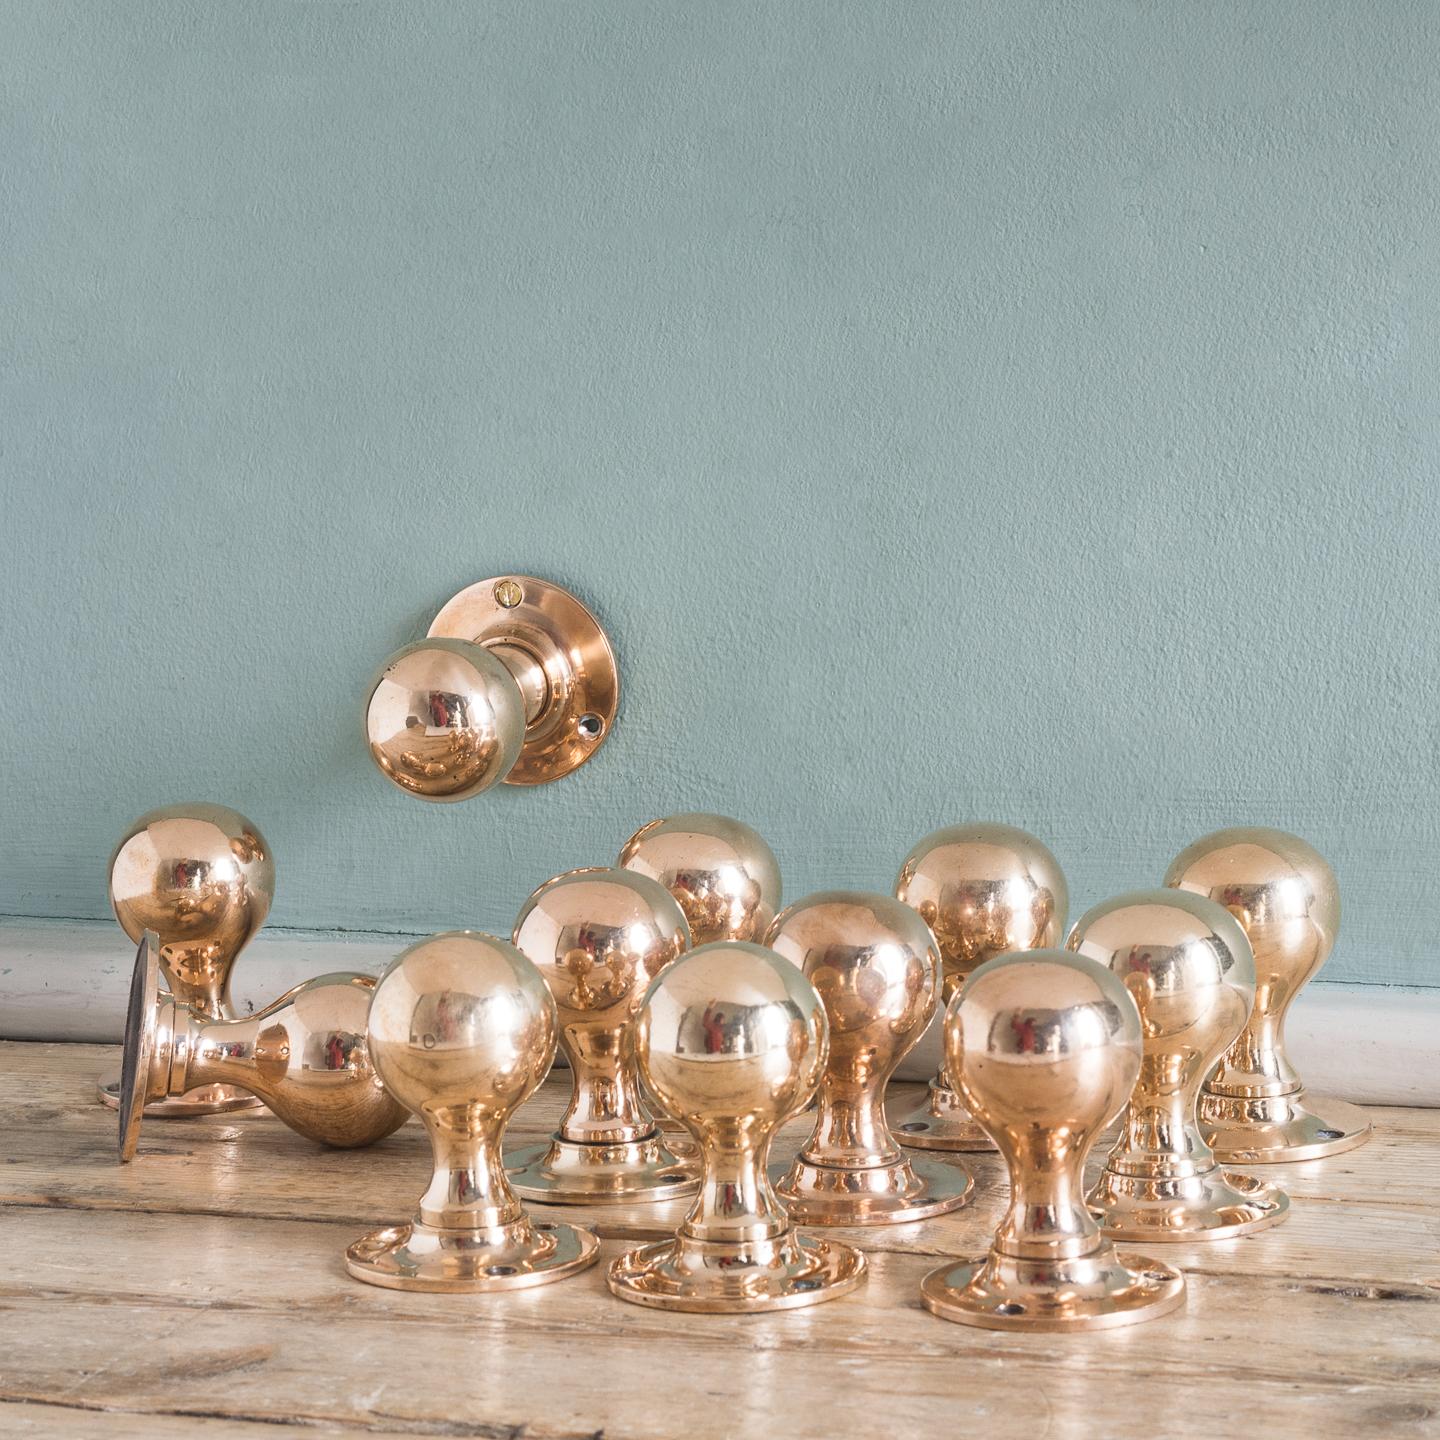 Early 20th century rose brass door knobs, on turned backplates.